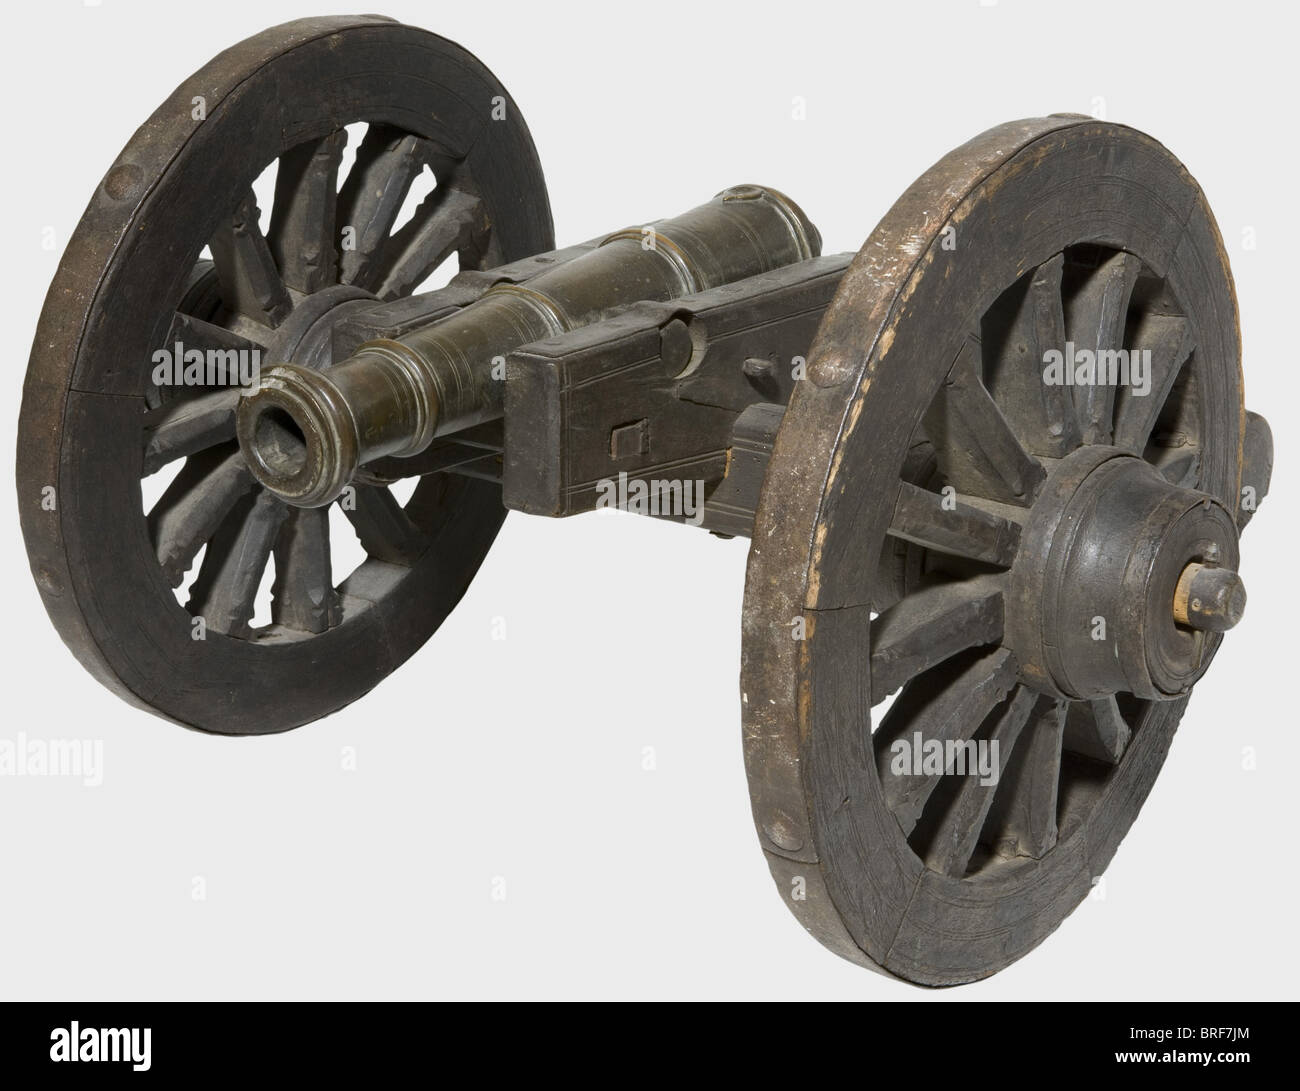 A model of a field cannon, 17th/18th century. Slender bronze barrel in 27 mm calibre with a cannon muzzle, two side-mounted trunnions, and a touchhole in a heart-shaped depression on top. Wooden carriage (some worm damage) with iron fittings and iron mounted wheels with spokes. Barrel length 39 cm. Total length 78 cm. historic, historical,, 18th century, 17th century, cannon, cannons, artillery, firearm, fire arm, firearms, fire arms, weapons, arms, weapon, arm, fighting device, military, militaria, object, objects, stills, clipping, clippings, cut out, cut-out, Stock Photo